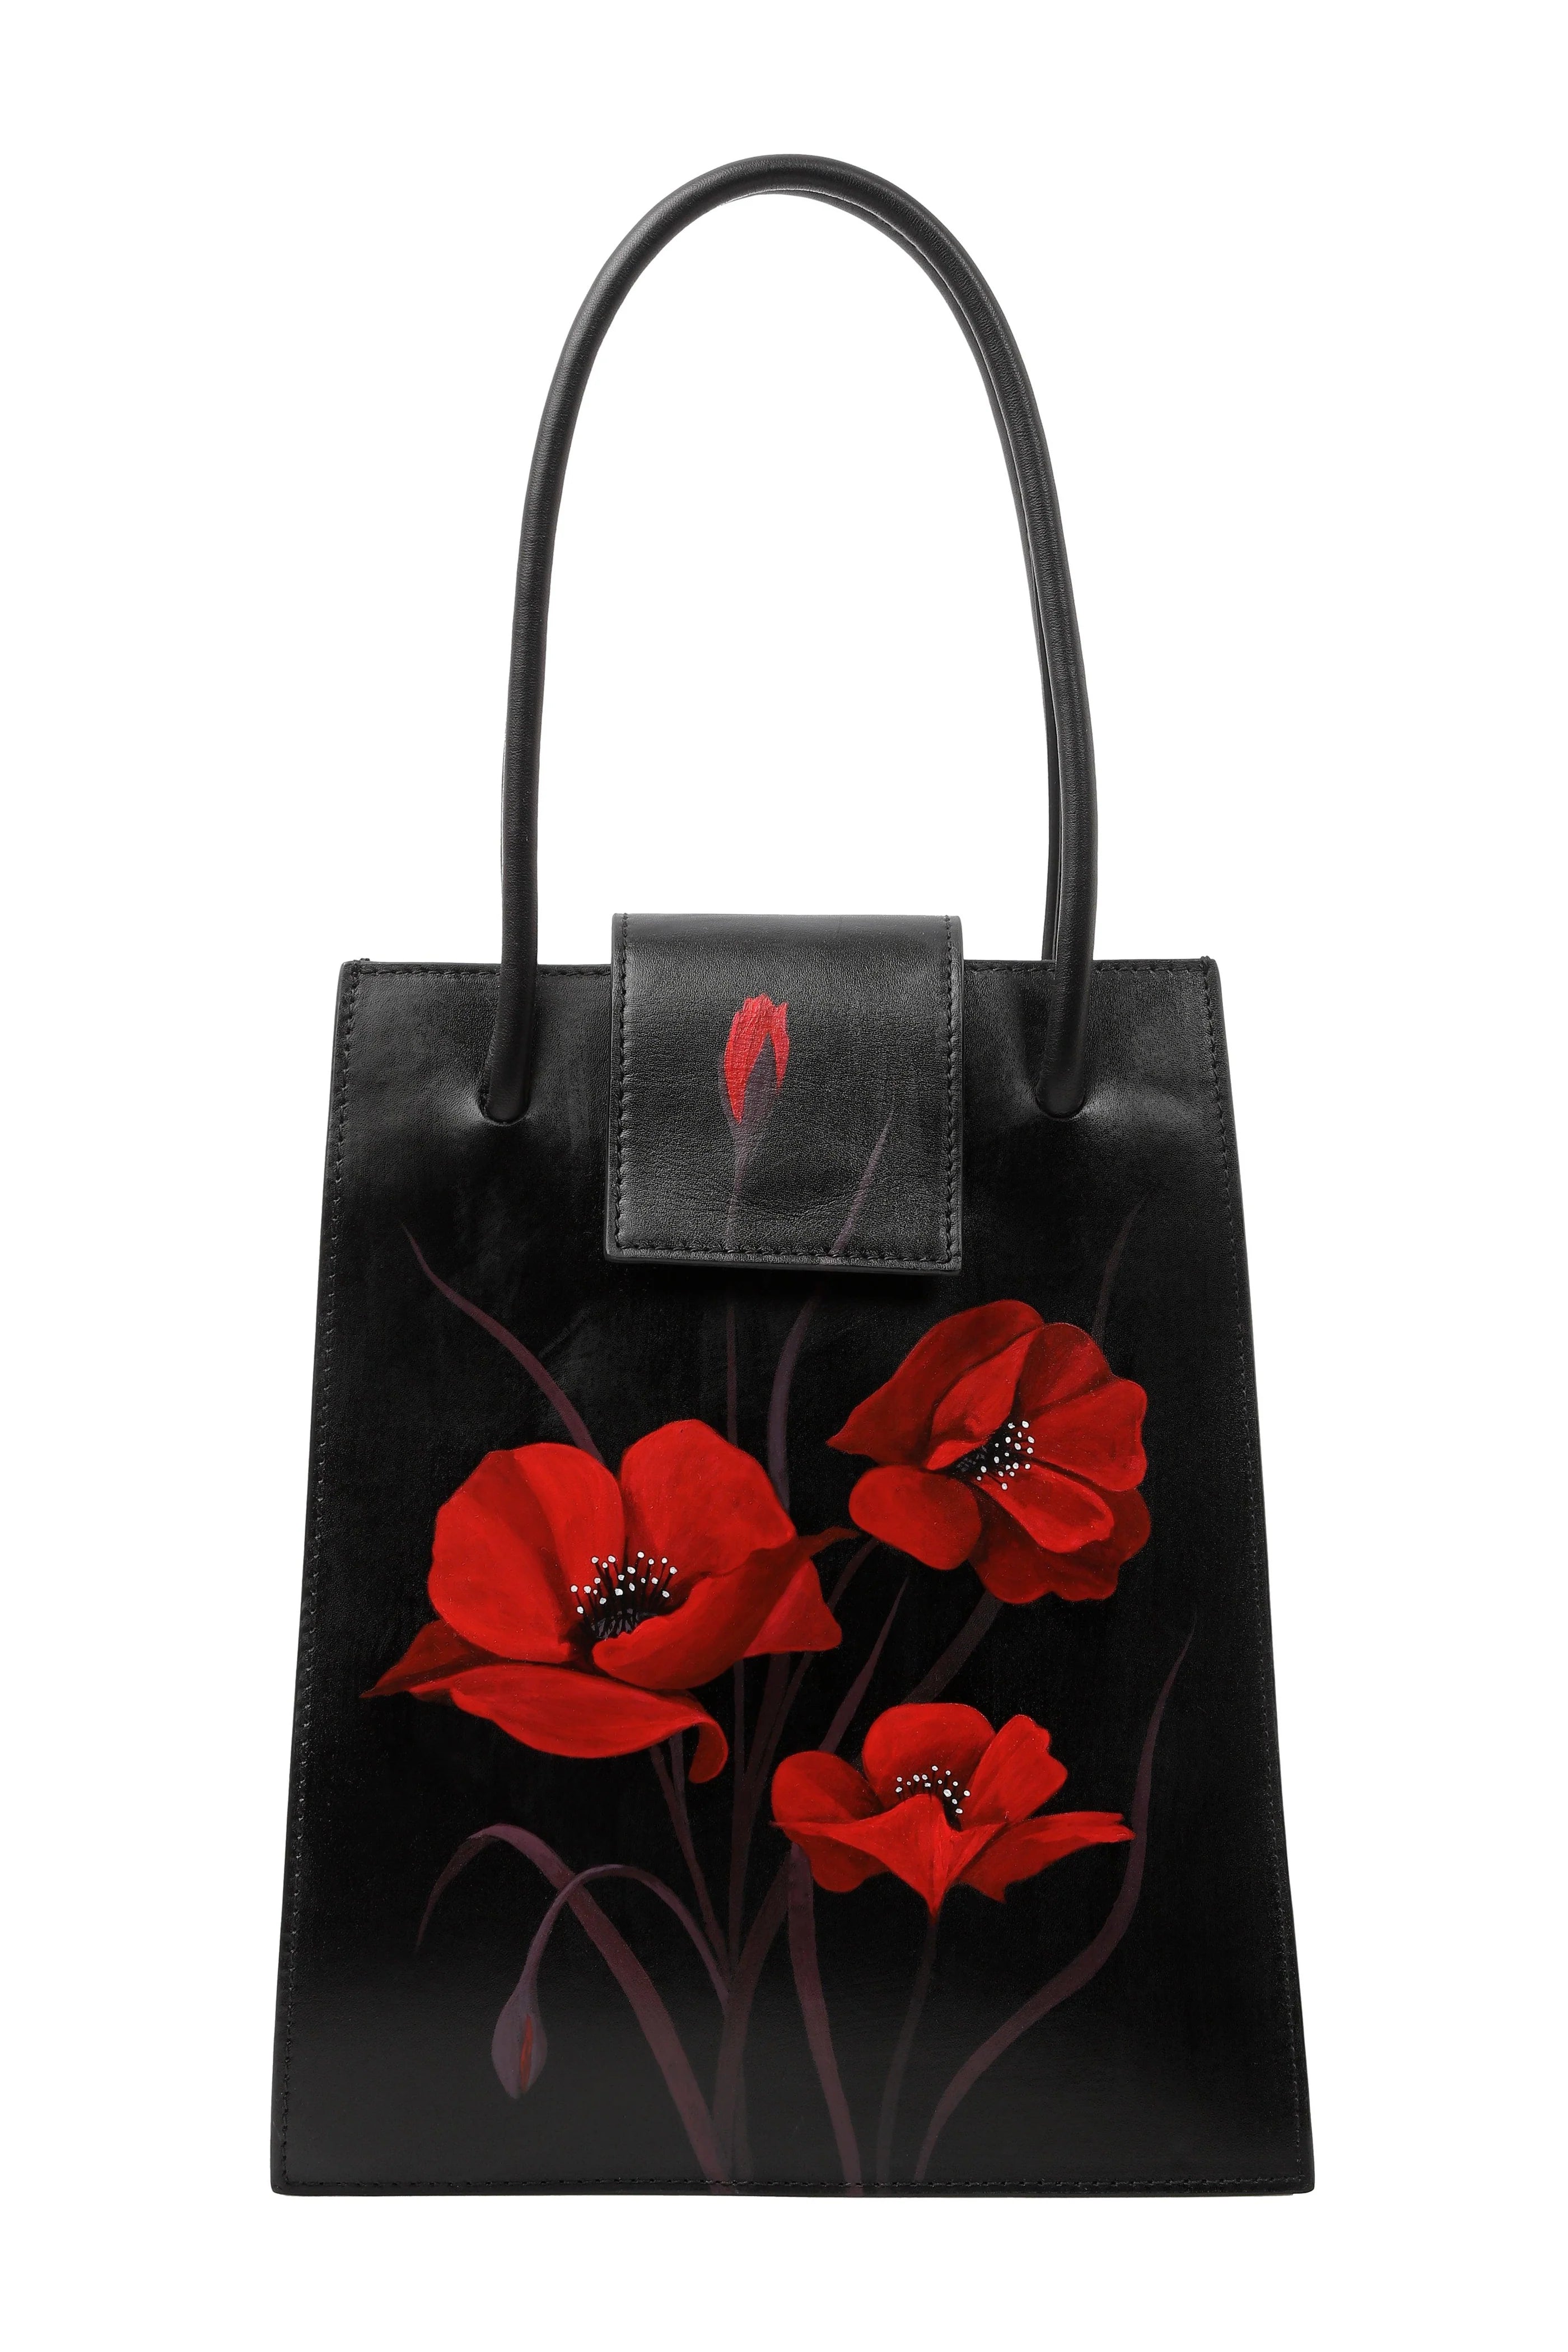 Whispering Poppies Hand-Painted Handle Bag